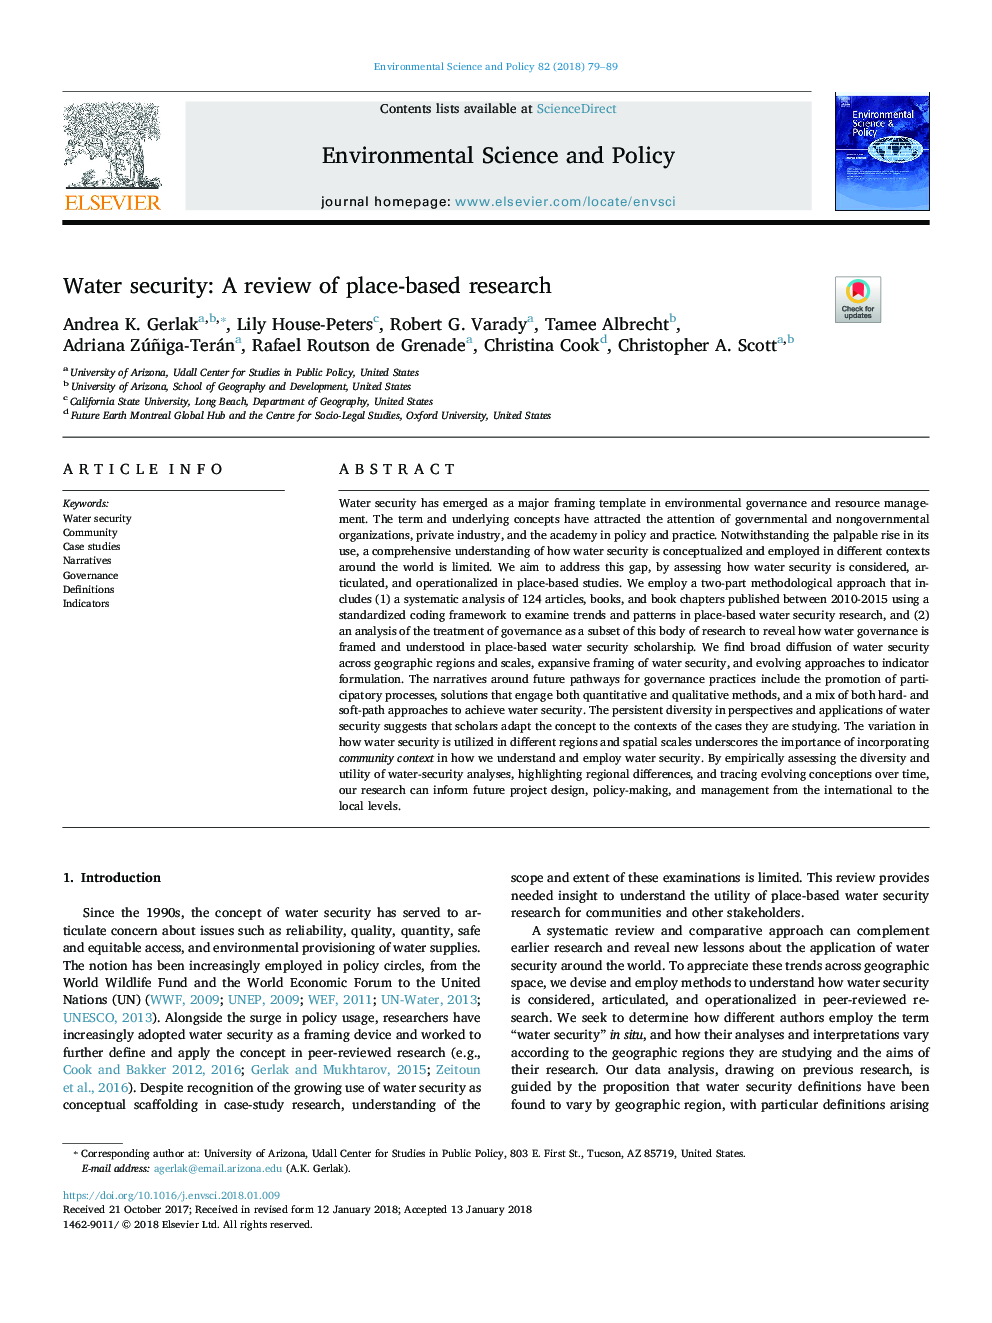 Water security: A review of place-based research